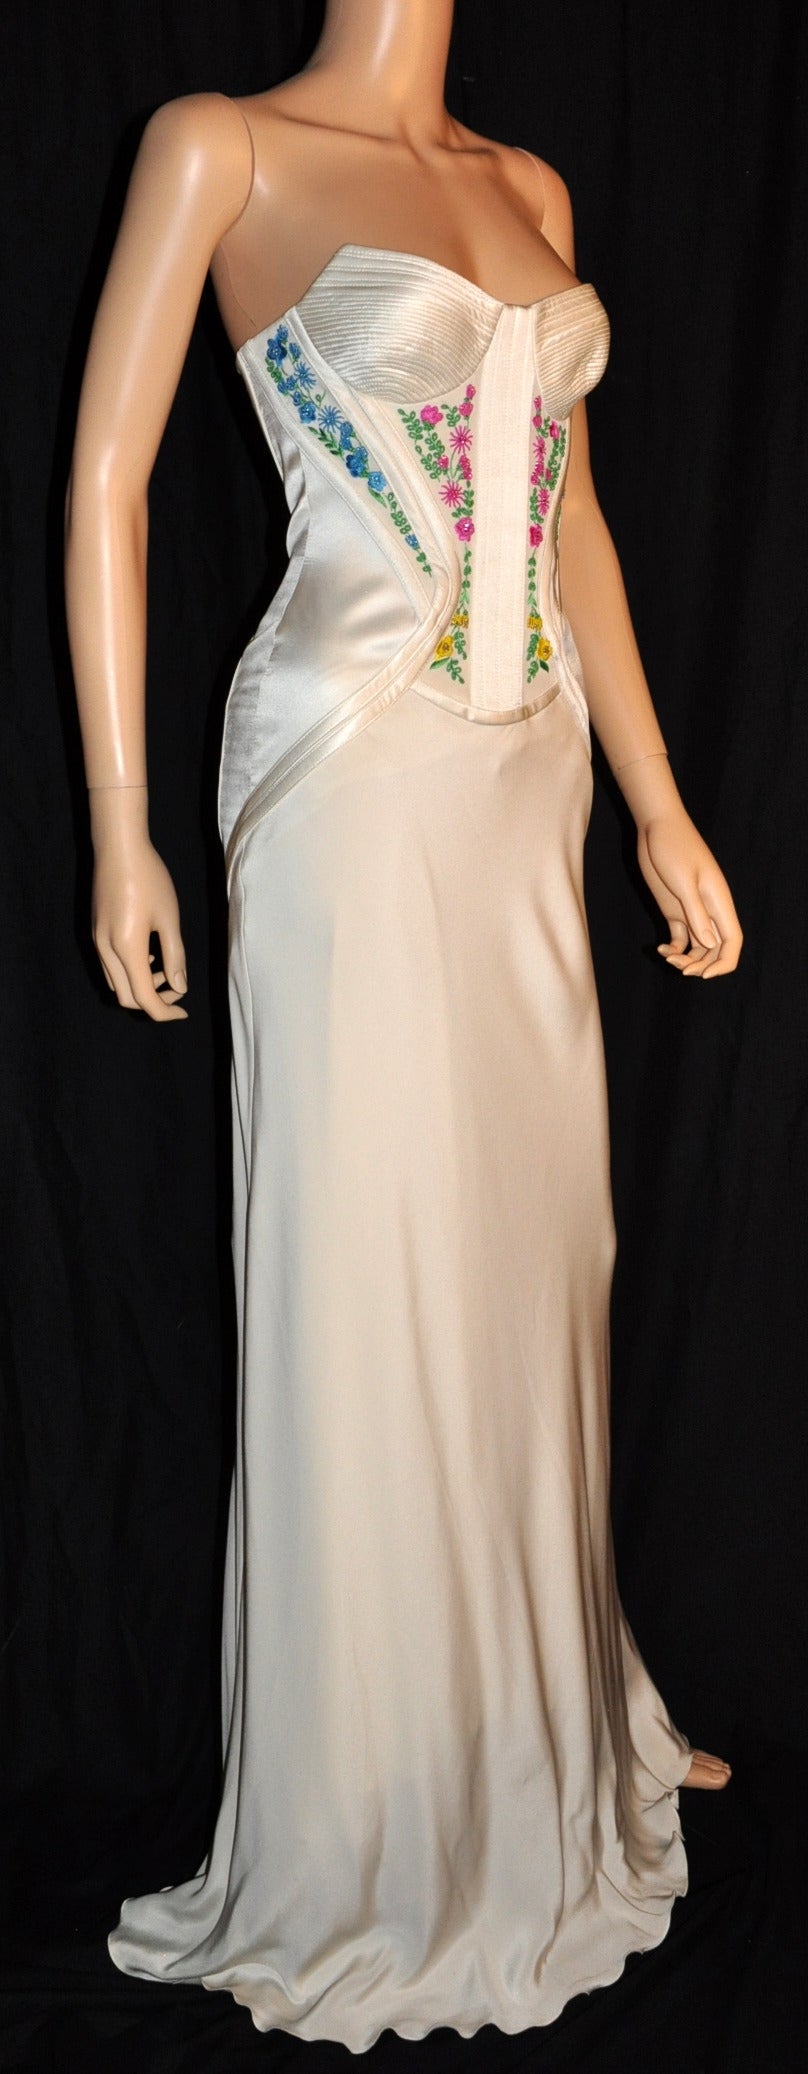 Revived from Gianni Versace’s archive is this
gorgeous, floor-skimming, dress. Donatella
brought back this design that originally was
part of Gianni’s Atelier line in 1995. Adorned
with colorful, floral embroidery this white
dress is simply